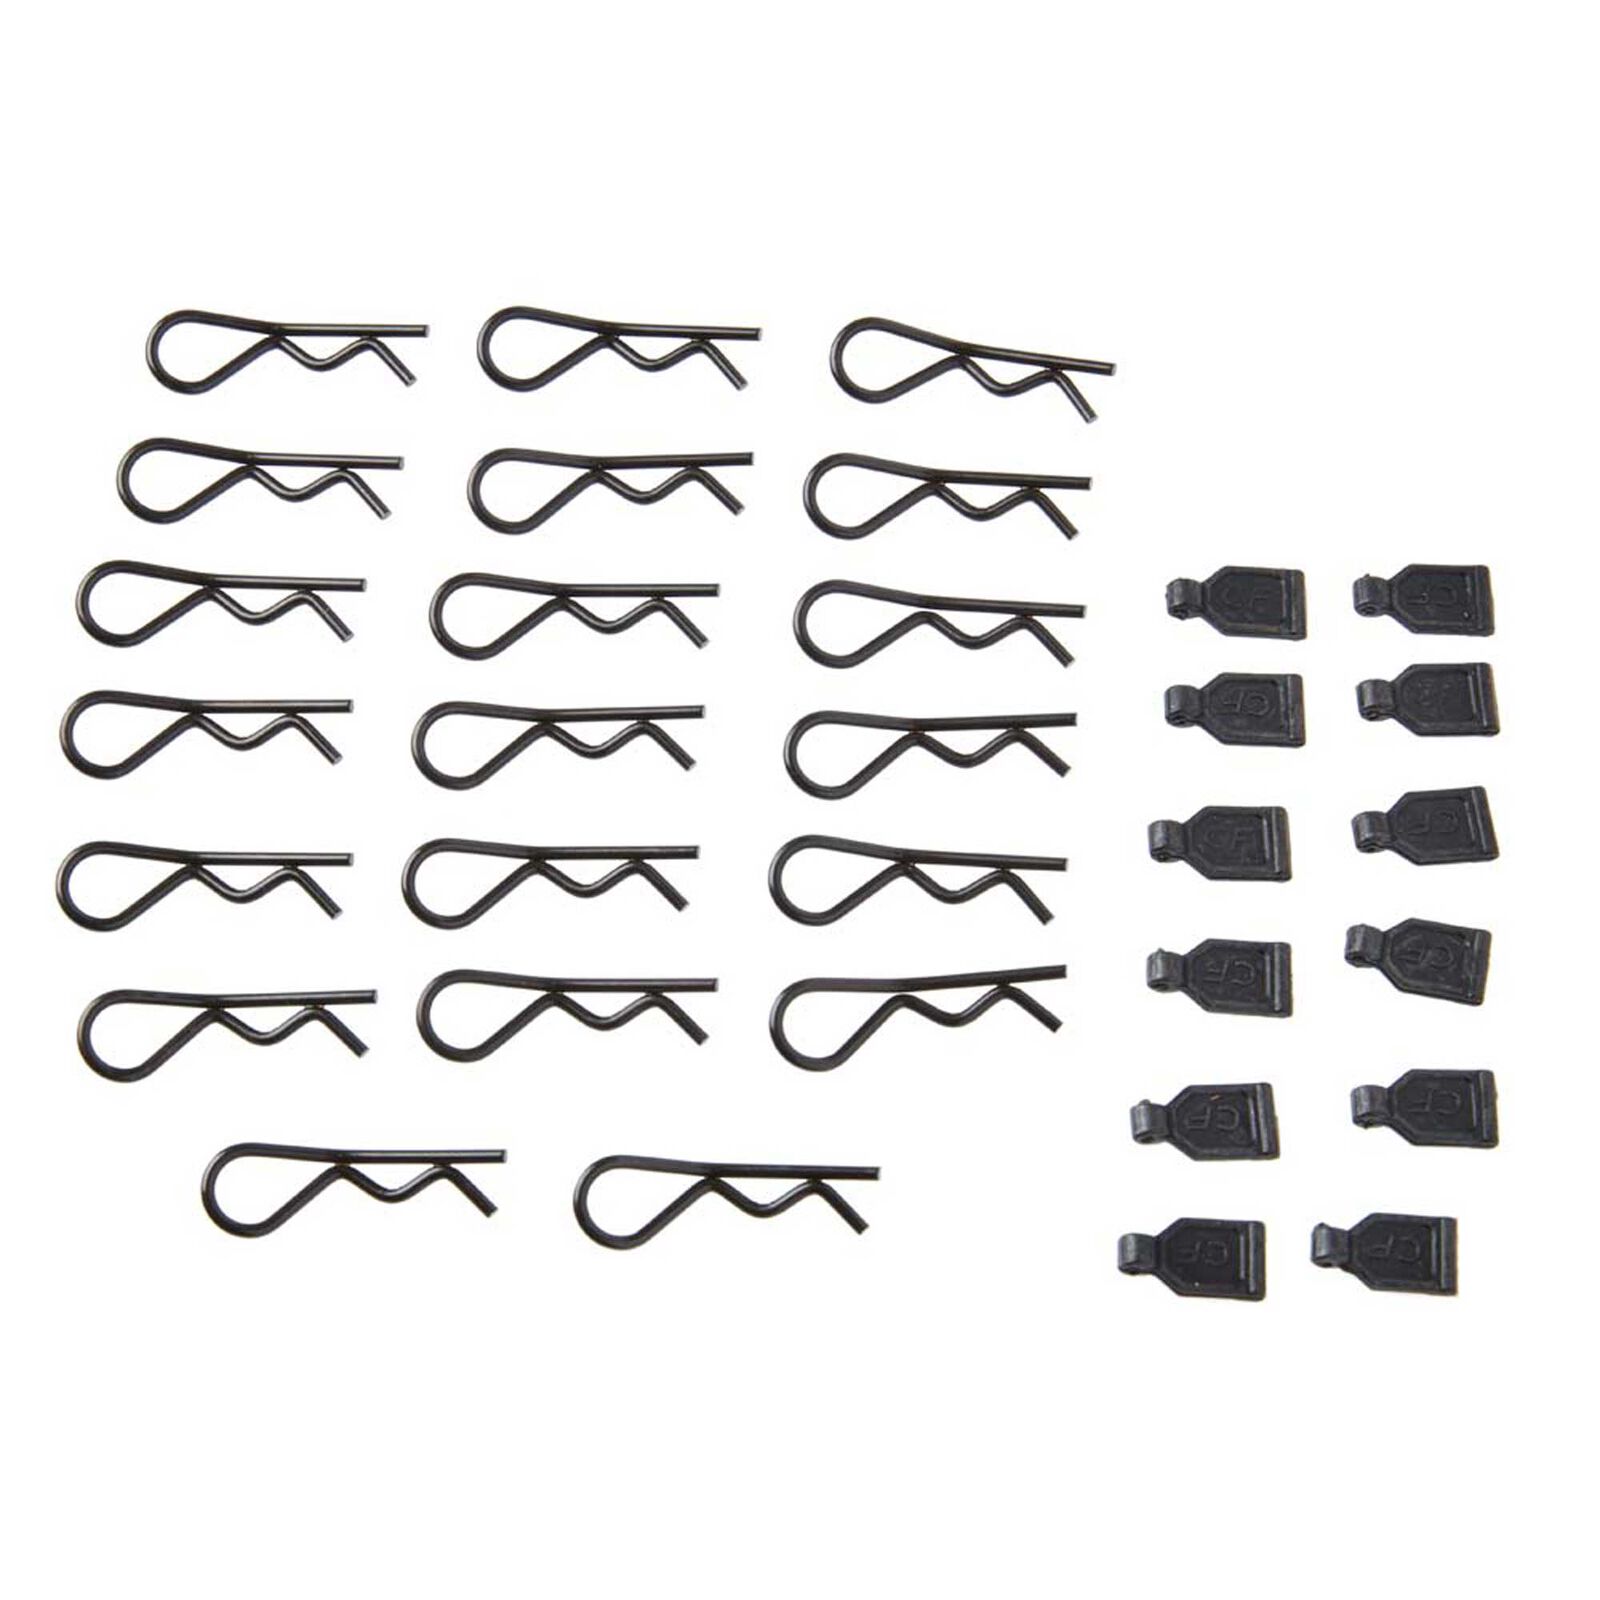 1/8 Body Clips (20) & Rubber Pull Tabs (12)